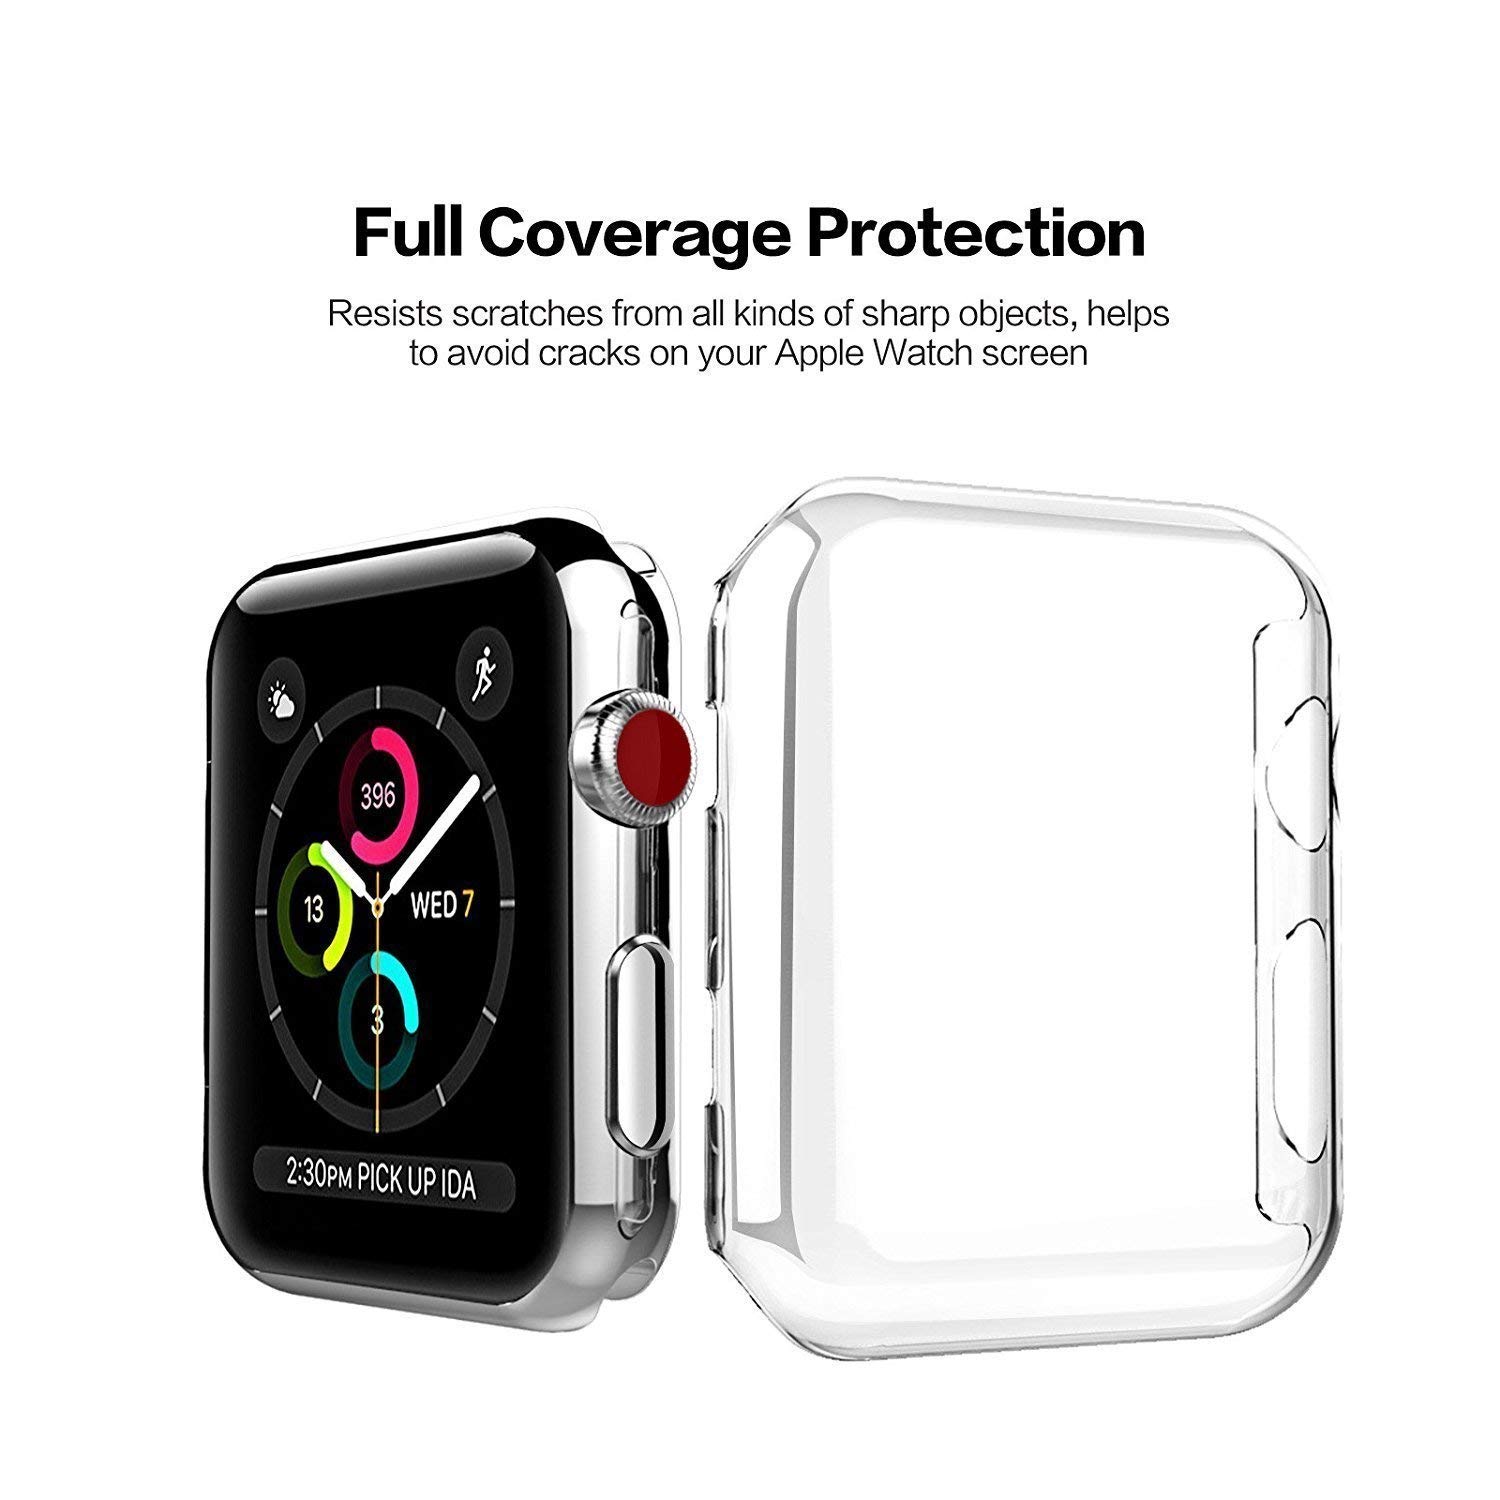 Series 4/5/6/SE Apple Watch Replacement Bands 44mm w/Full Body Clear Hard Case Screen Protector, Soft Silicone Wristband for iWatch Apple Watch Series 5/6 44mm - Black - image 4 of 4